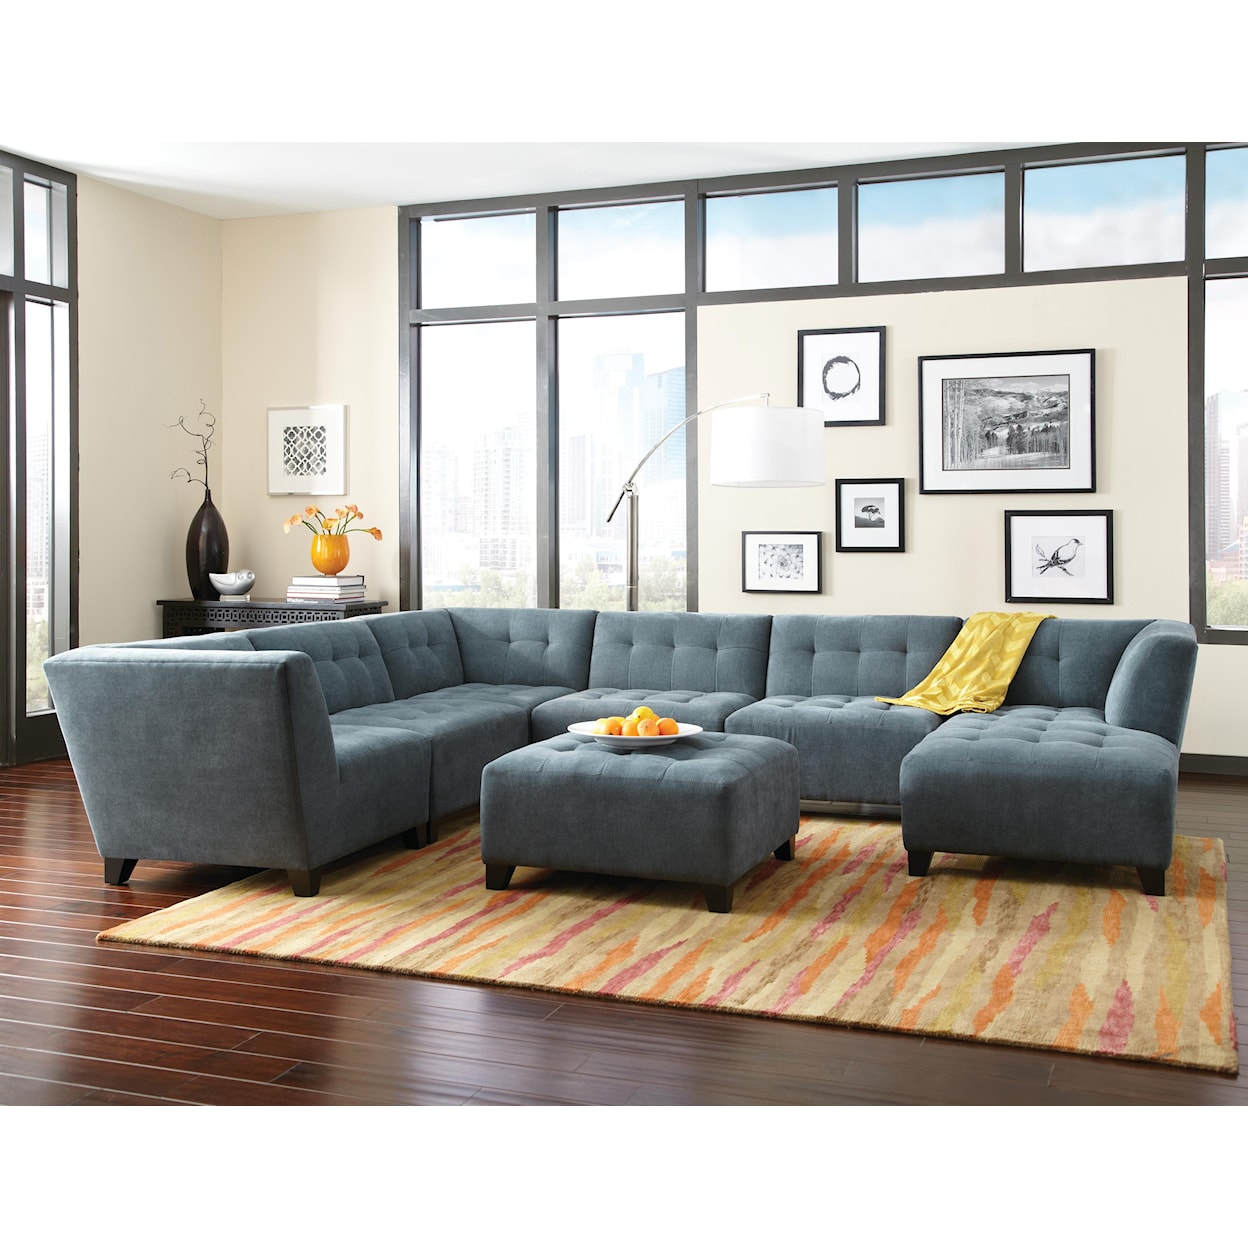 Jonathan Louis Belaire Stationary Living Room Group